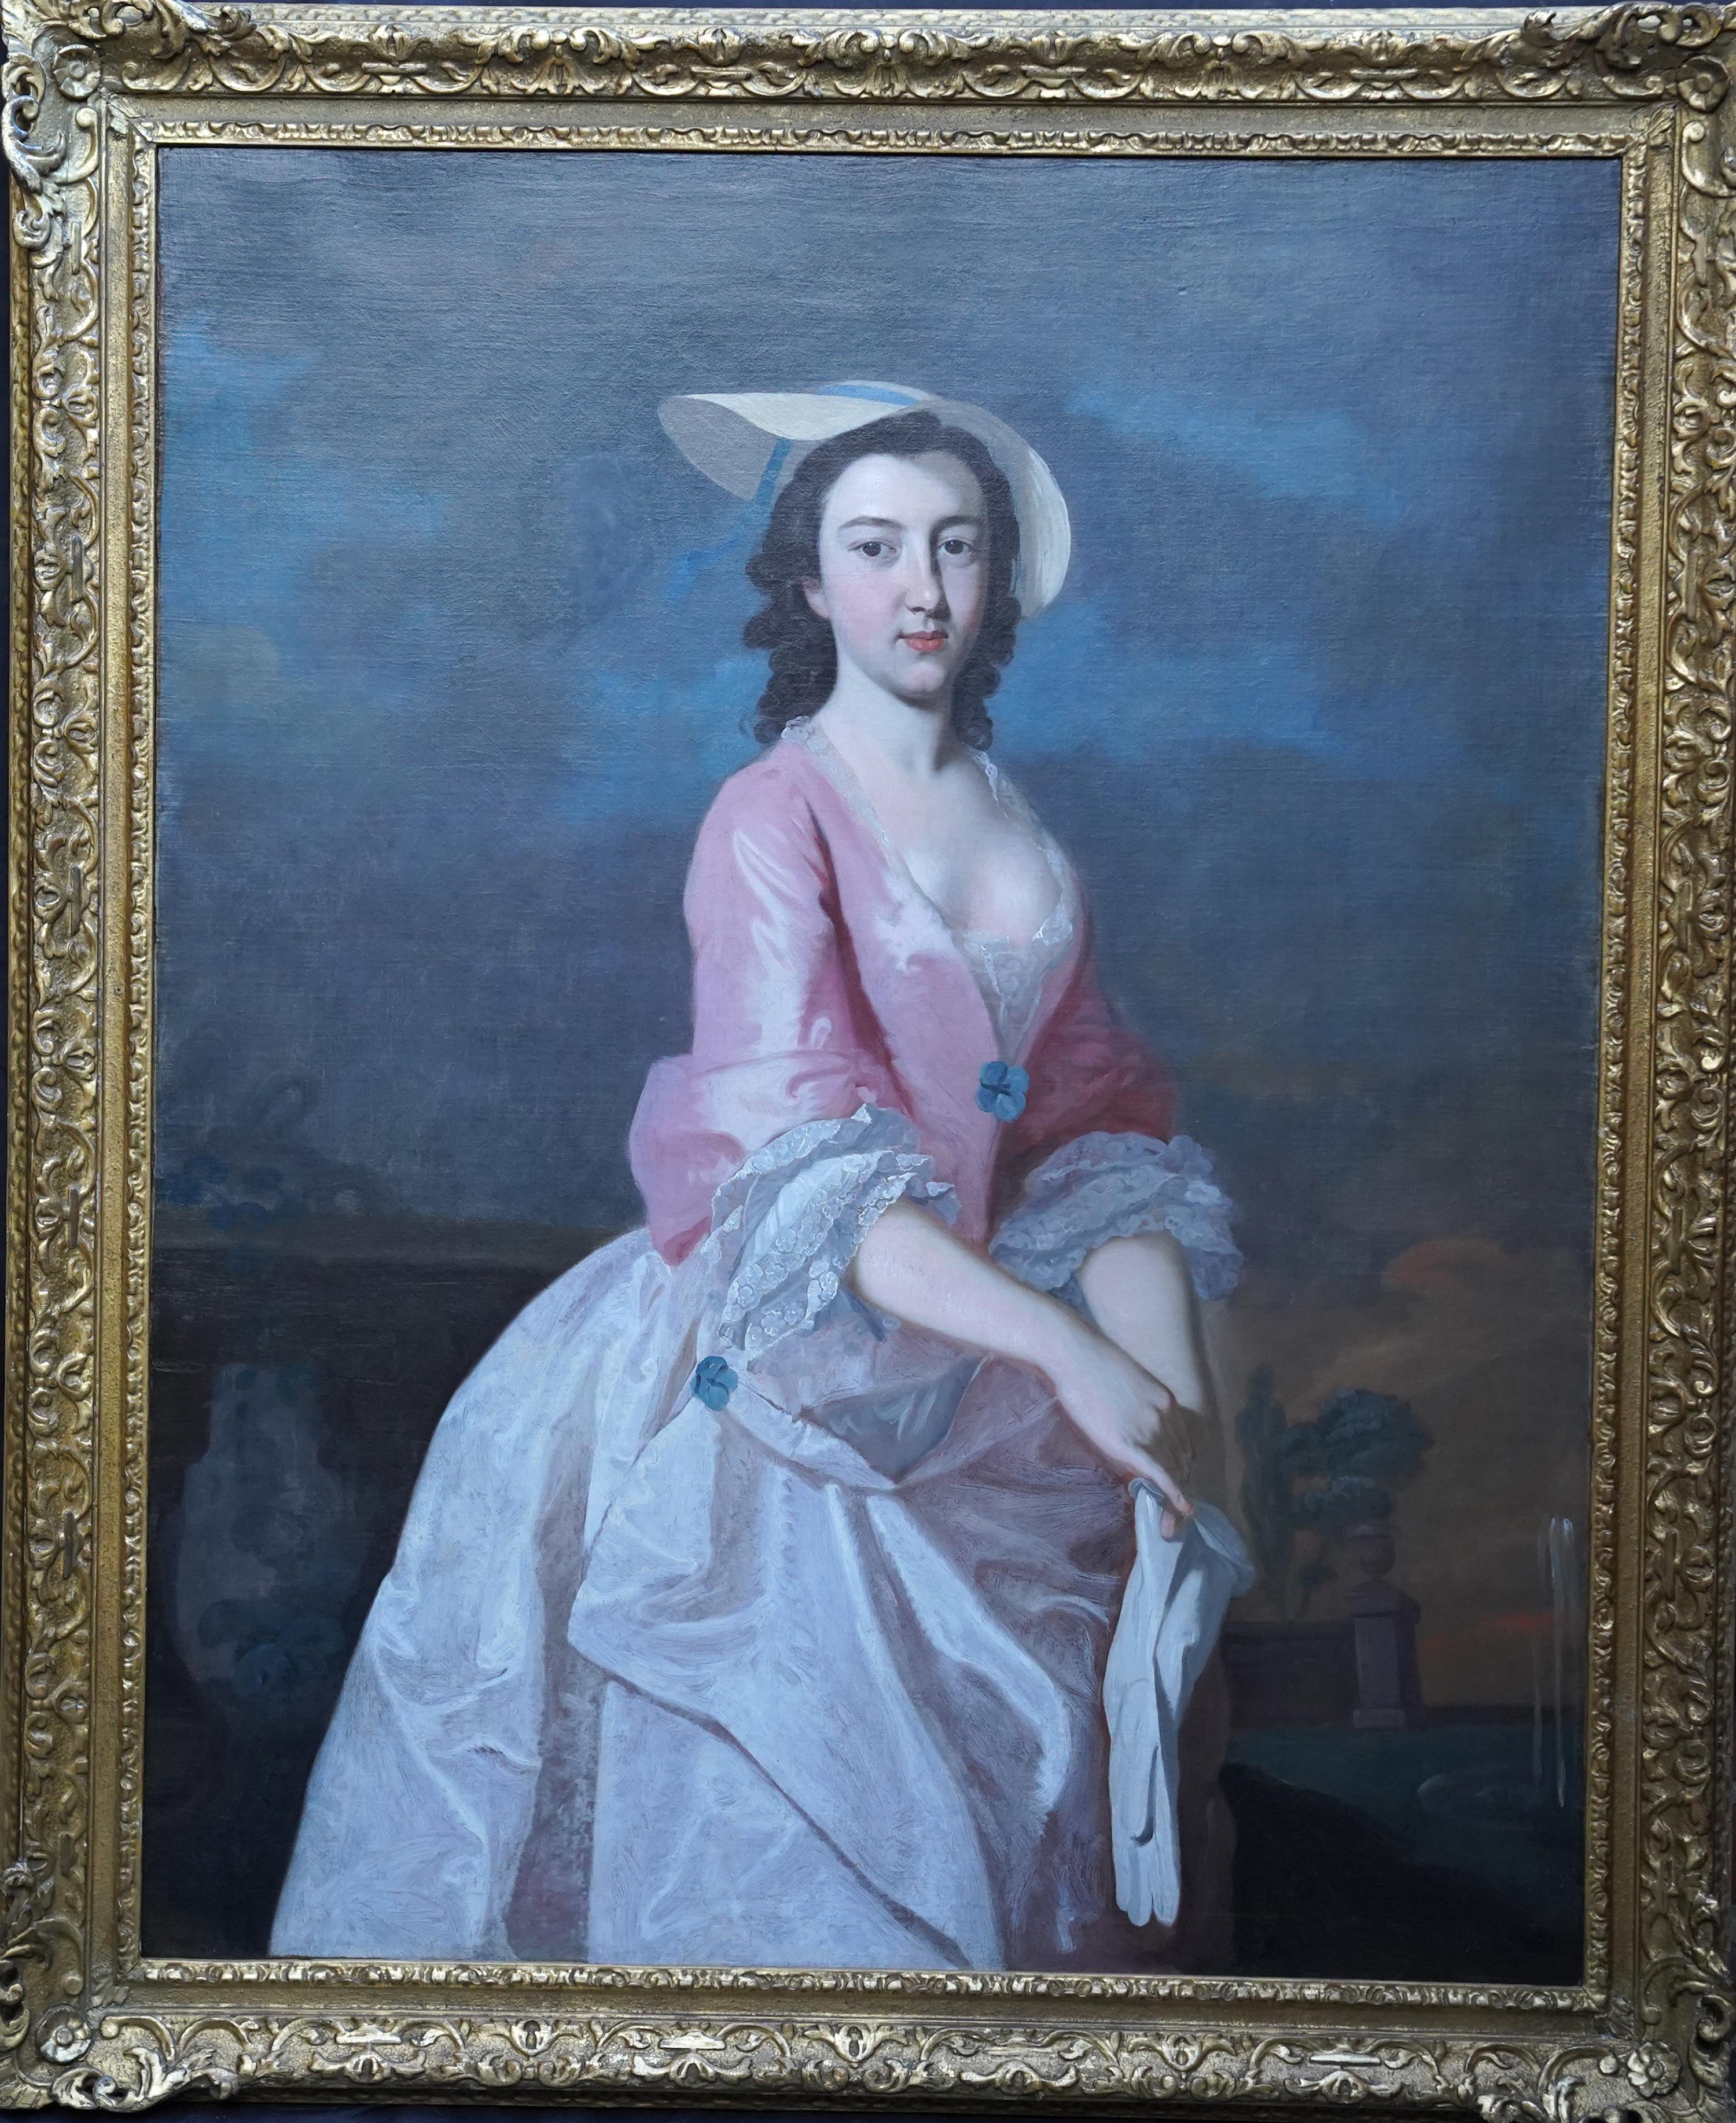 Thomas Hudson Portrait Painting - Portrait of a Lady with White Gloves - British 18thC art Old Master oil painting